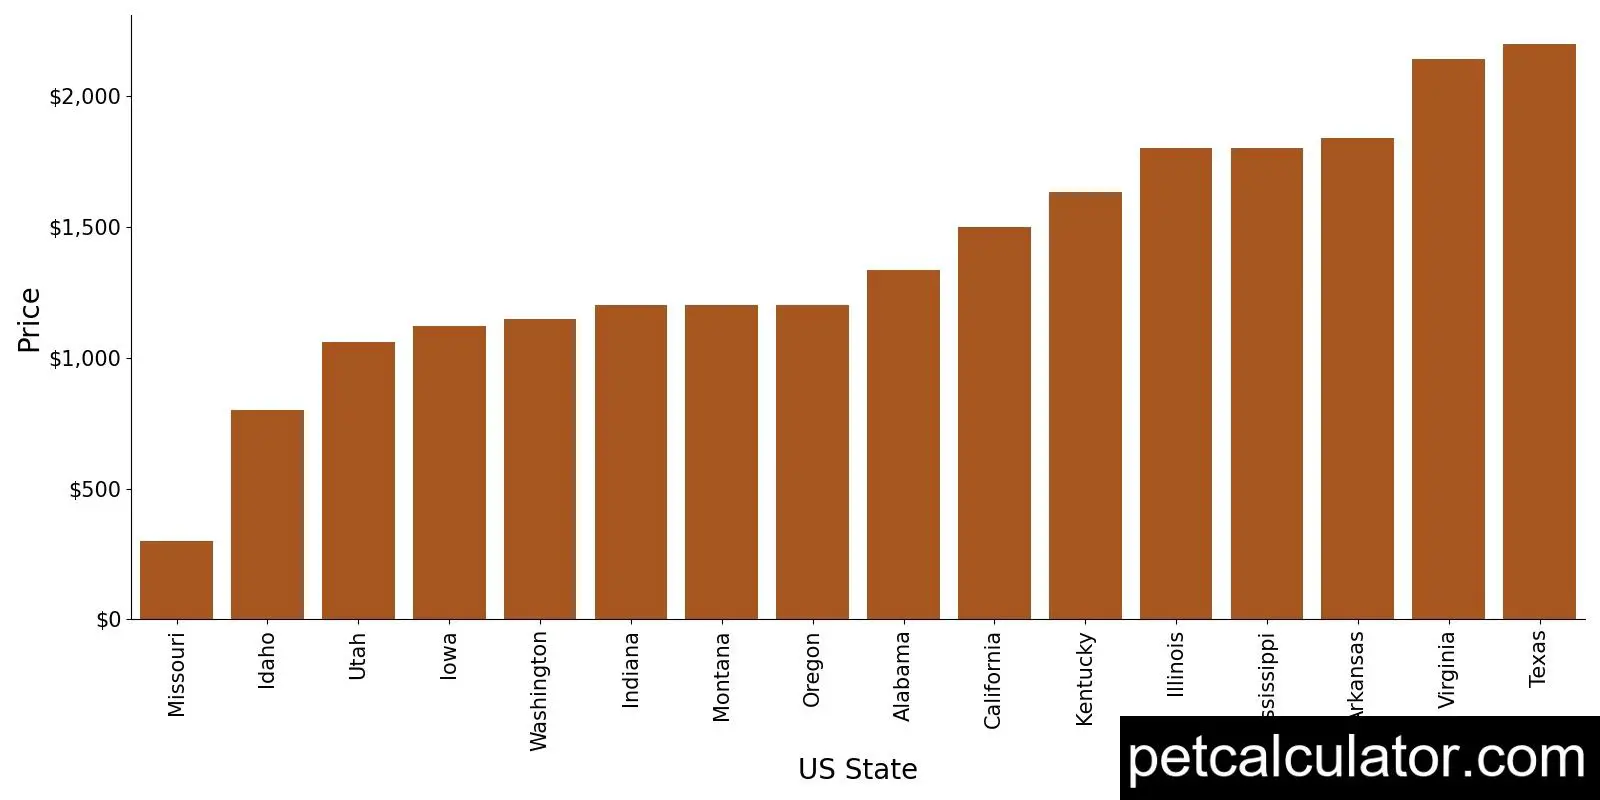 Price of Wirehaired Pointing Griffon by US State 